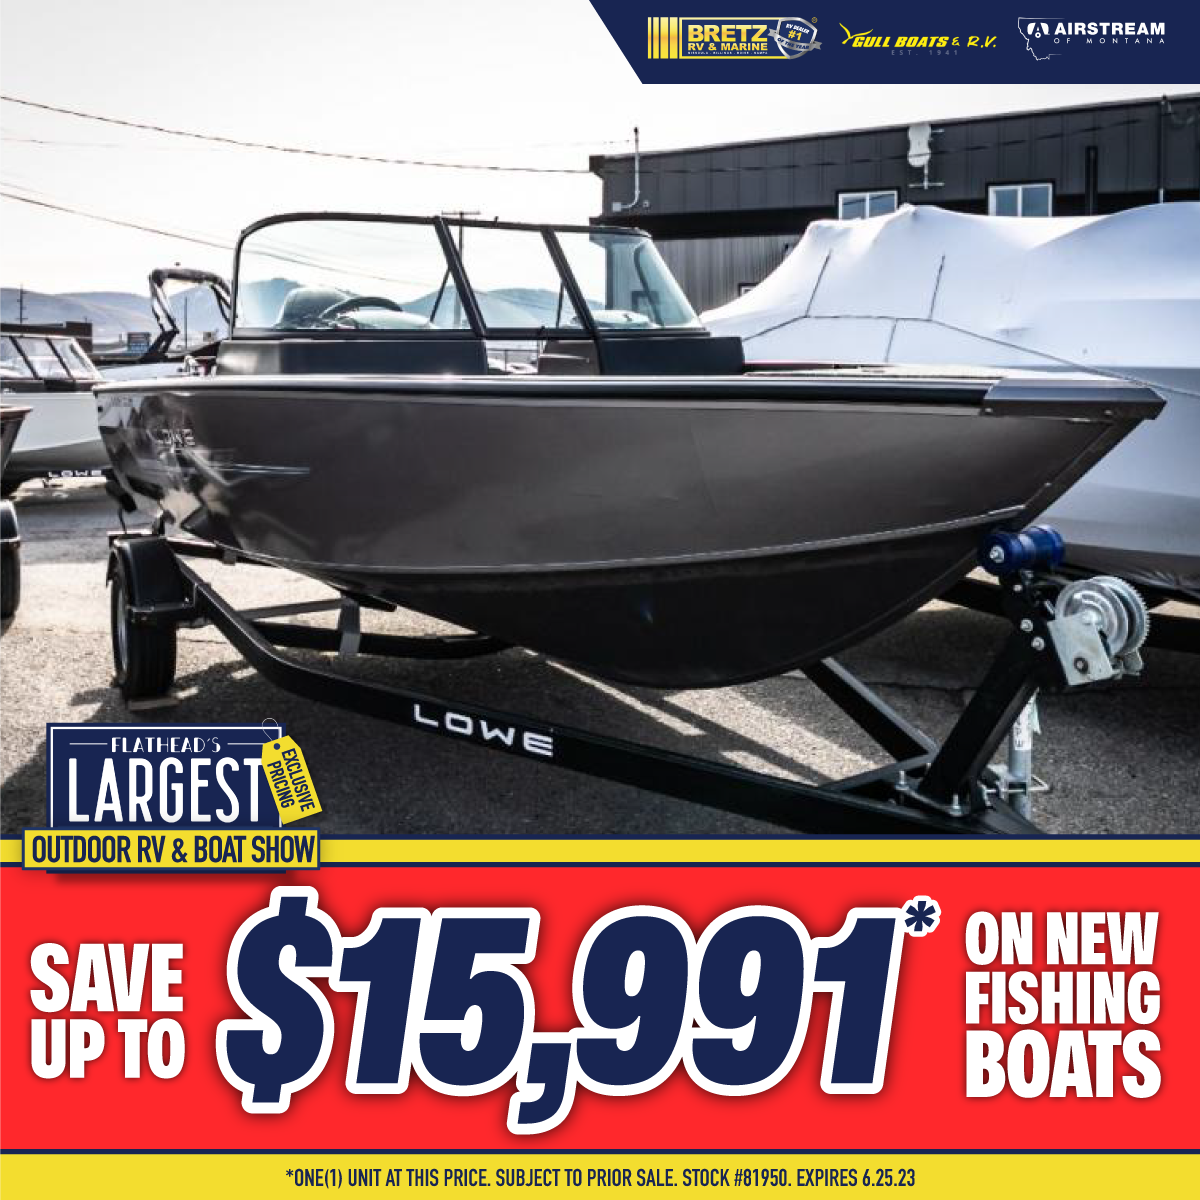 Save up to $15,991* on new fishing boats